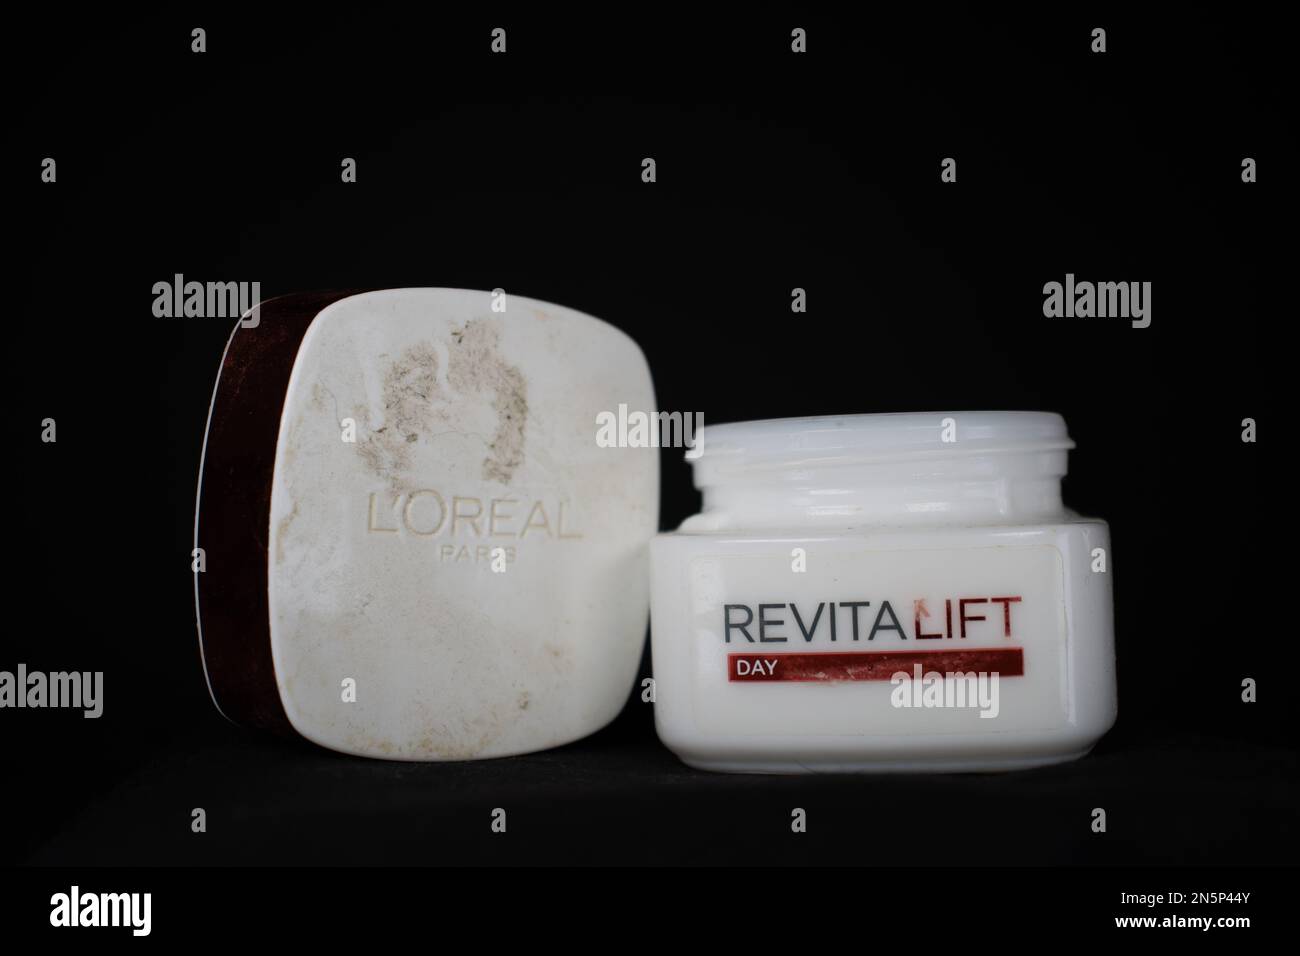 EXETER, DEVON, UK - JANUARY 9, 2023  L'Oréal S.A. is a French personal care company product Revitalift Day cream half used lid on one side Stock Photo